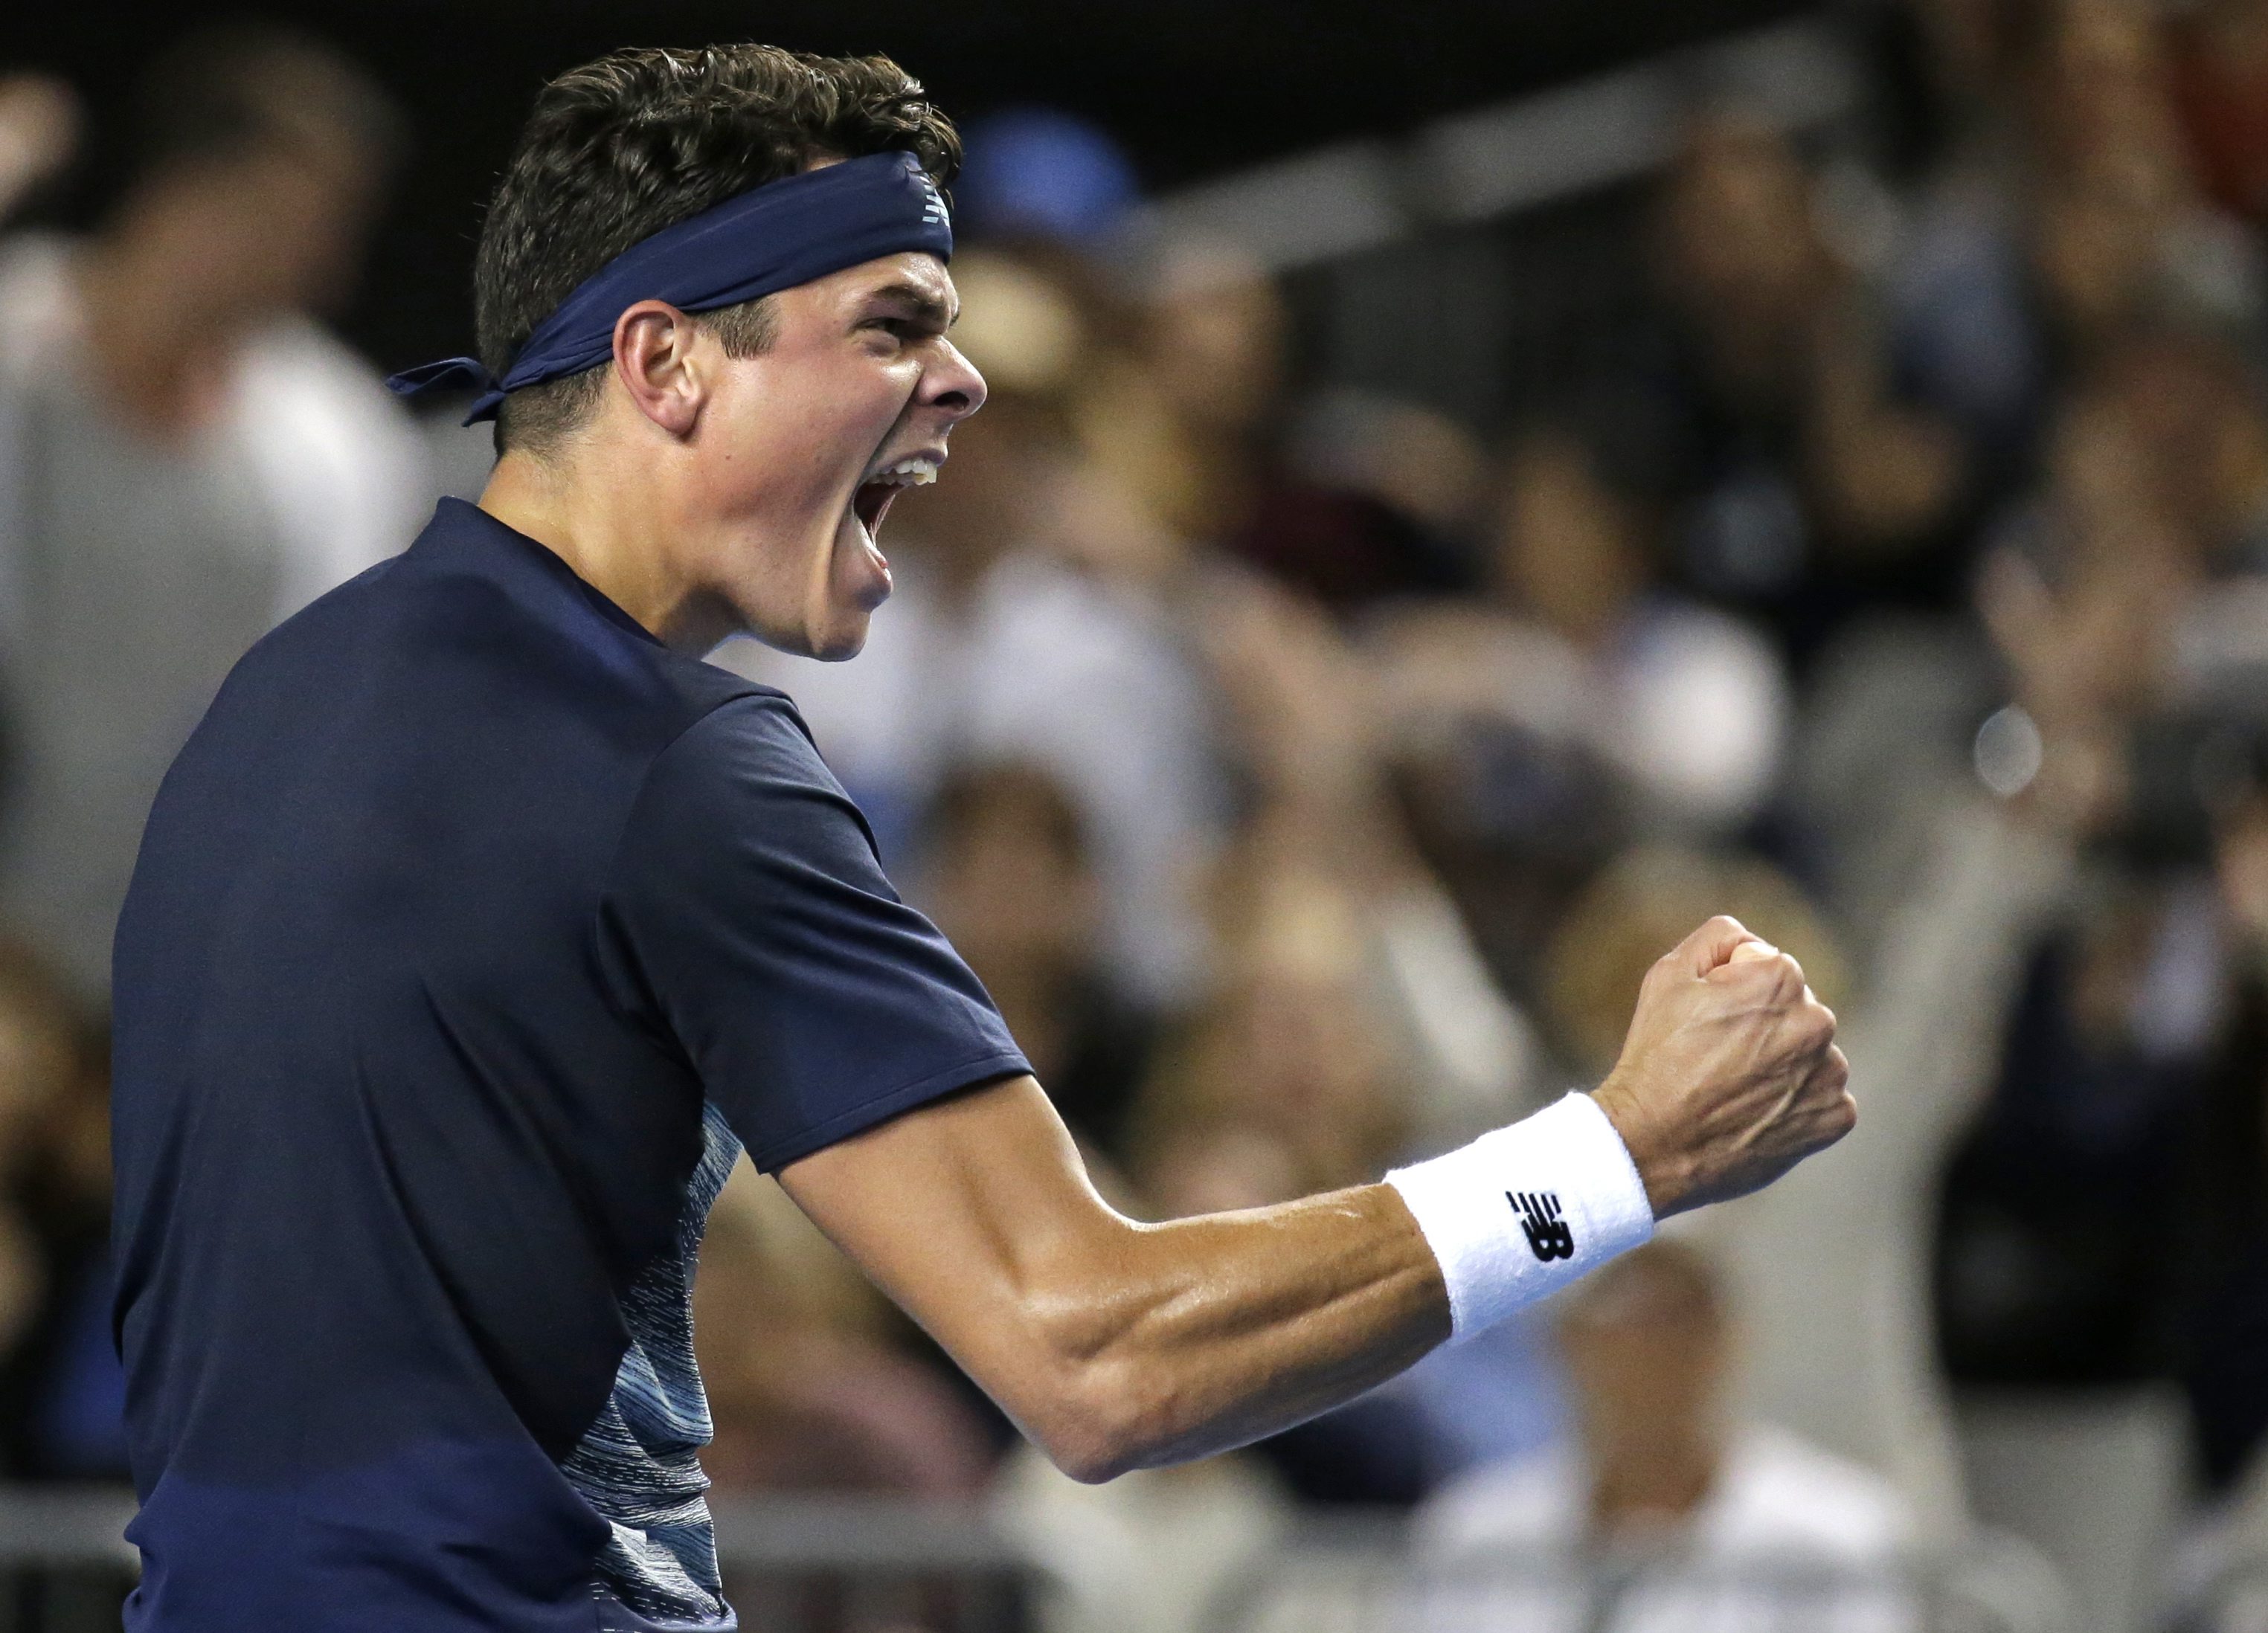 Canada's Milos Raonic celebrates after defeating France's Gilles Simon during their third round match at the Australian Open tennis championships in Melbourne, Australia, Saturday, Jan. 21, 2017. (AP Photo/Aaron Favila)